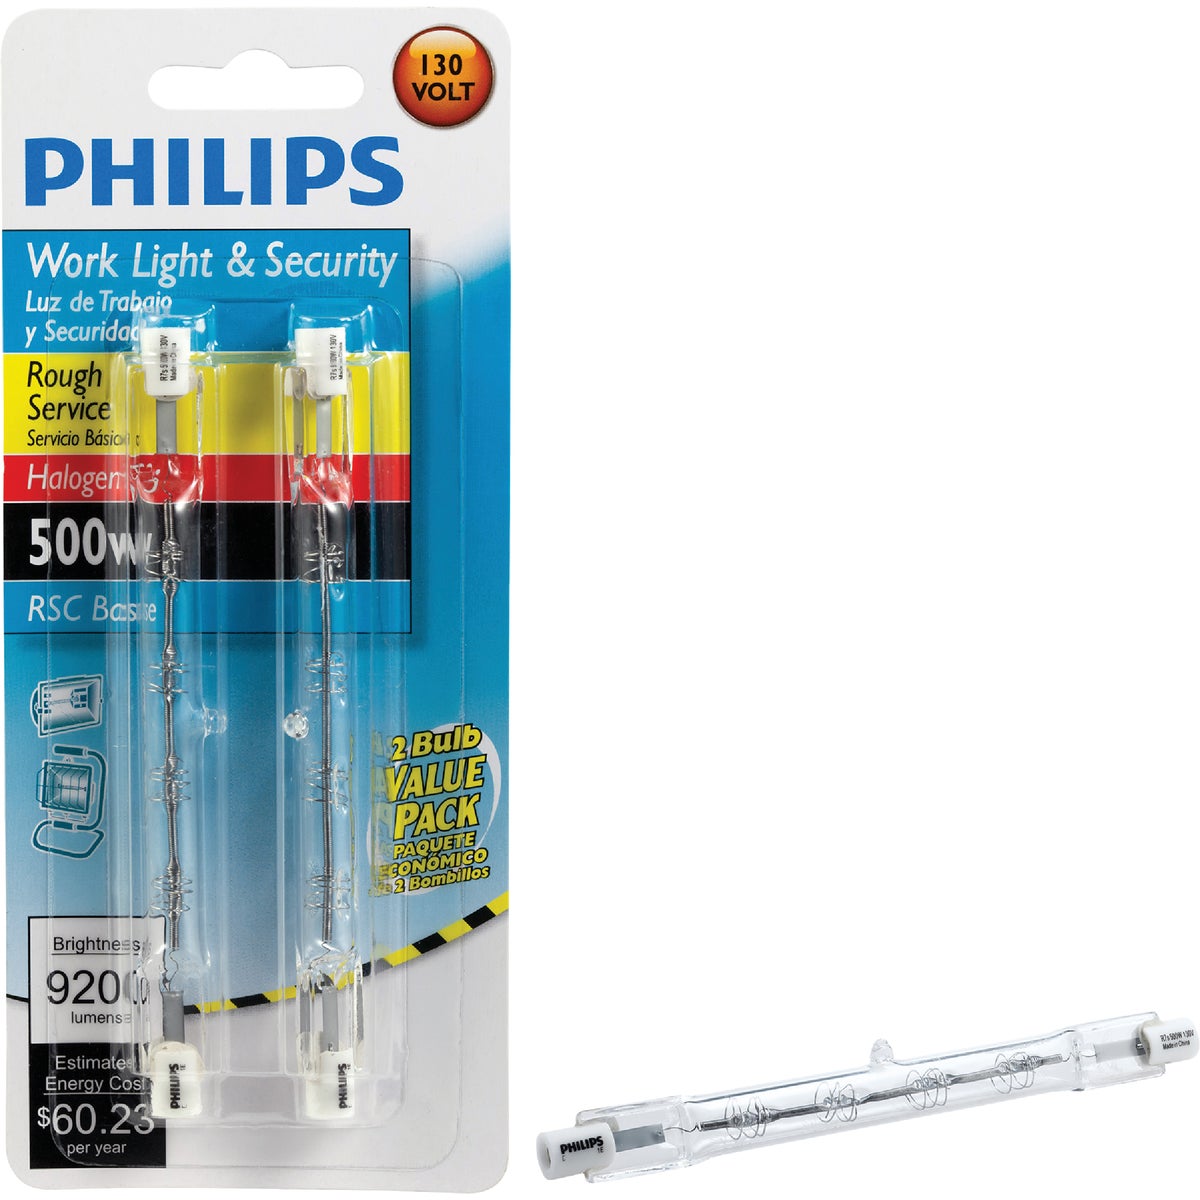 Philips Work Light and Security 500w 9200 Lumens 130 Volt Halogen T3 Fast Ship for sale online